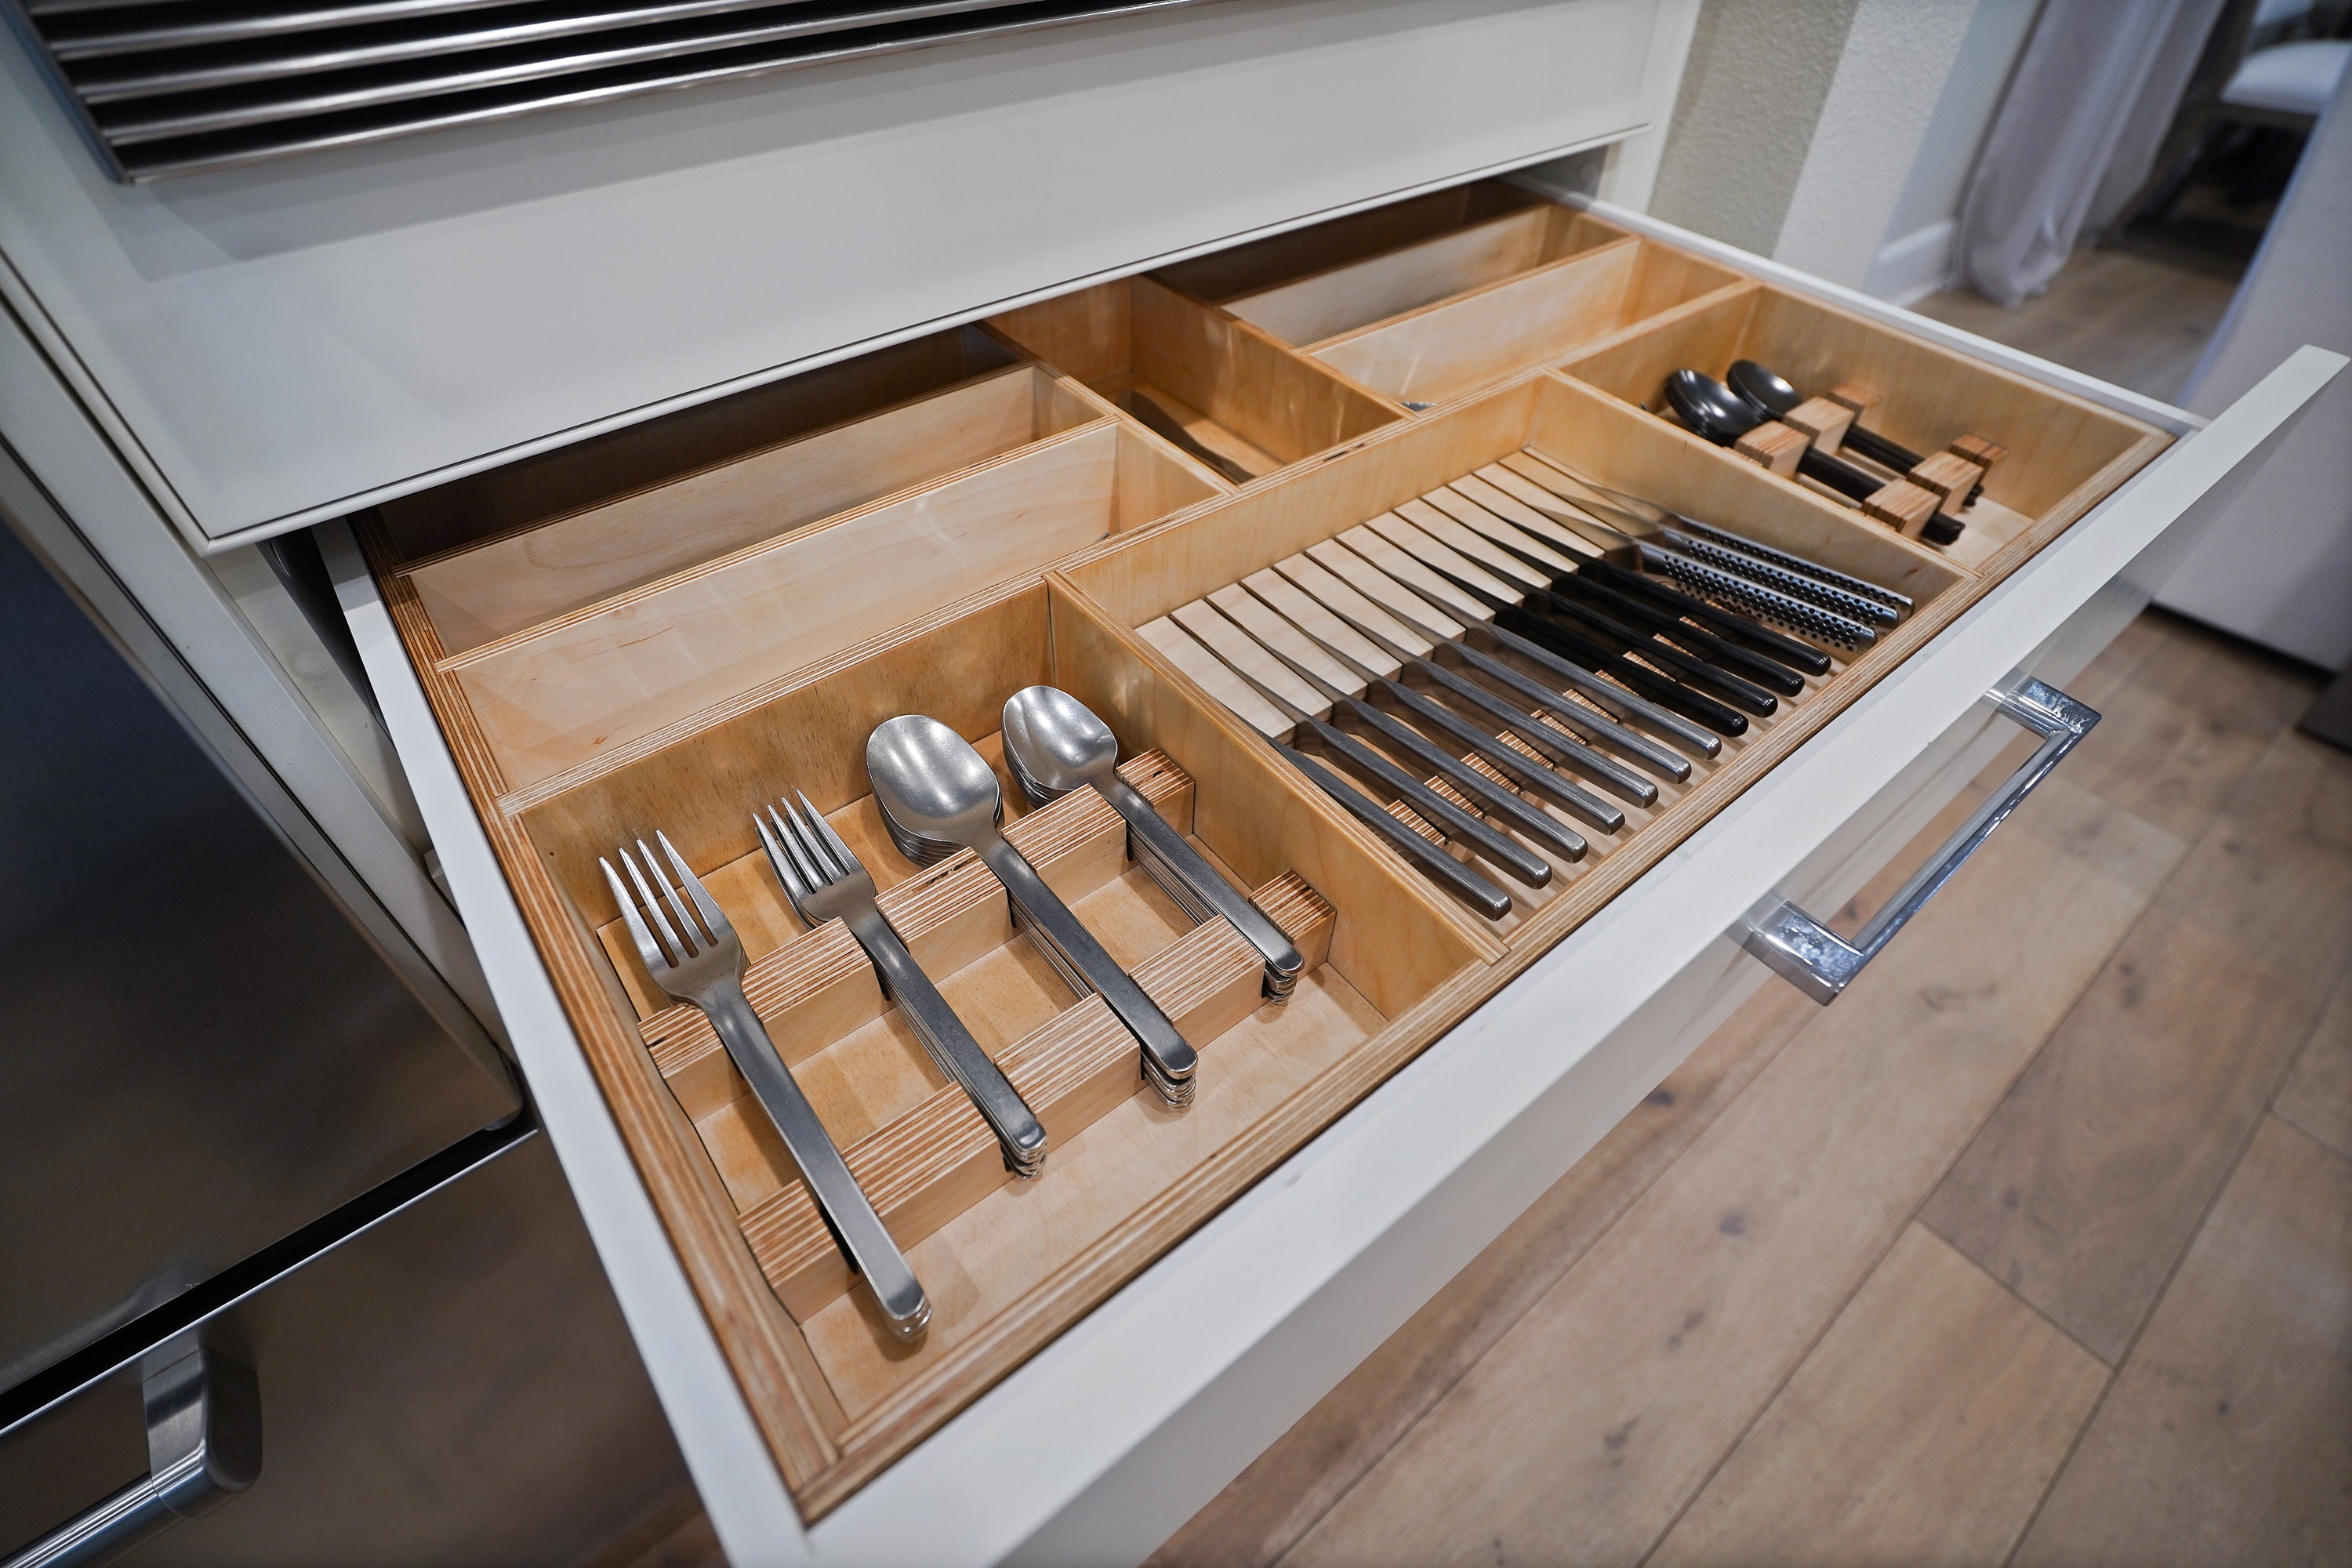 Medallion Cabinetry - Drawer Organizer with Cutlery Divider Insert